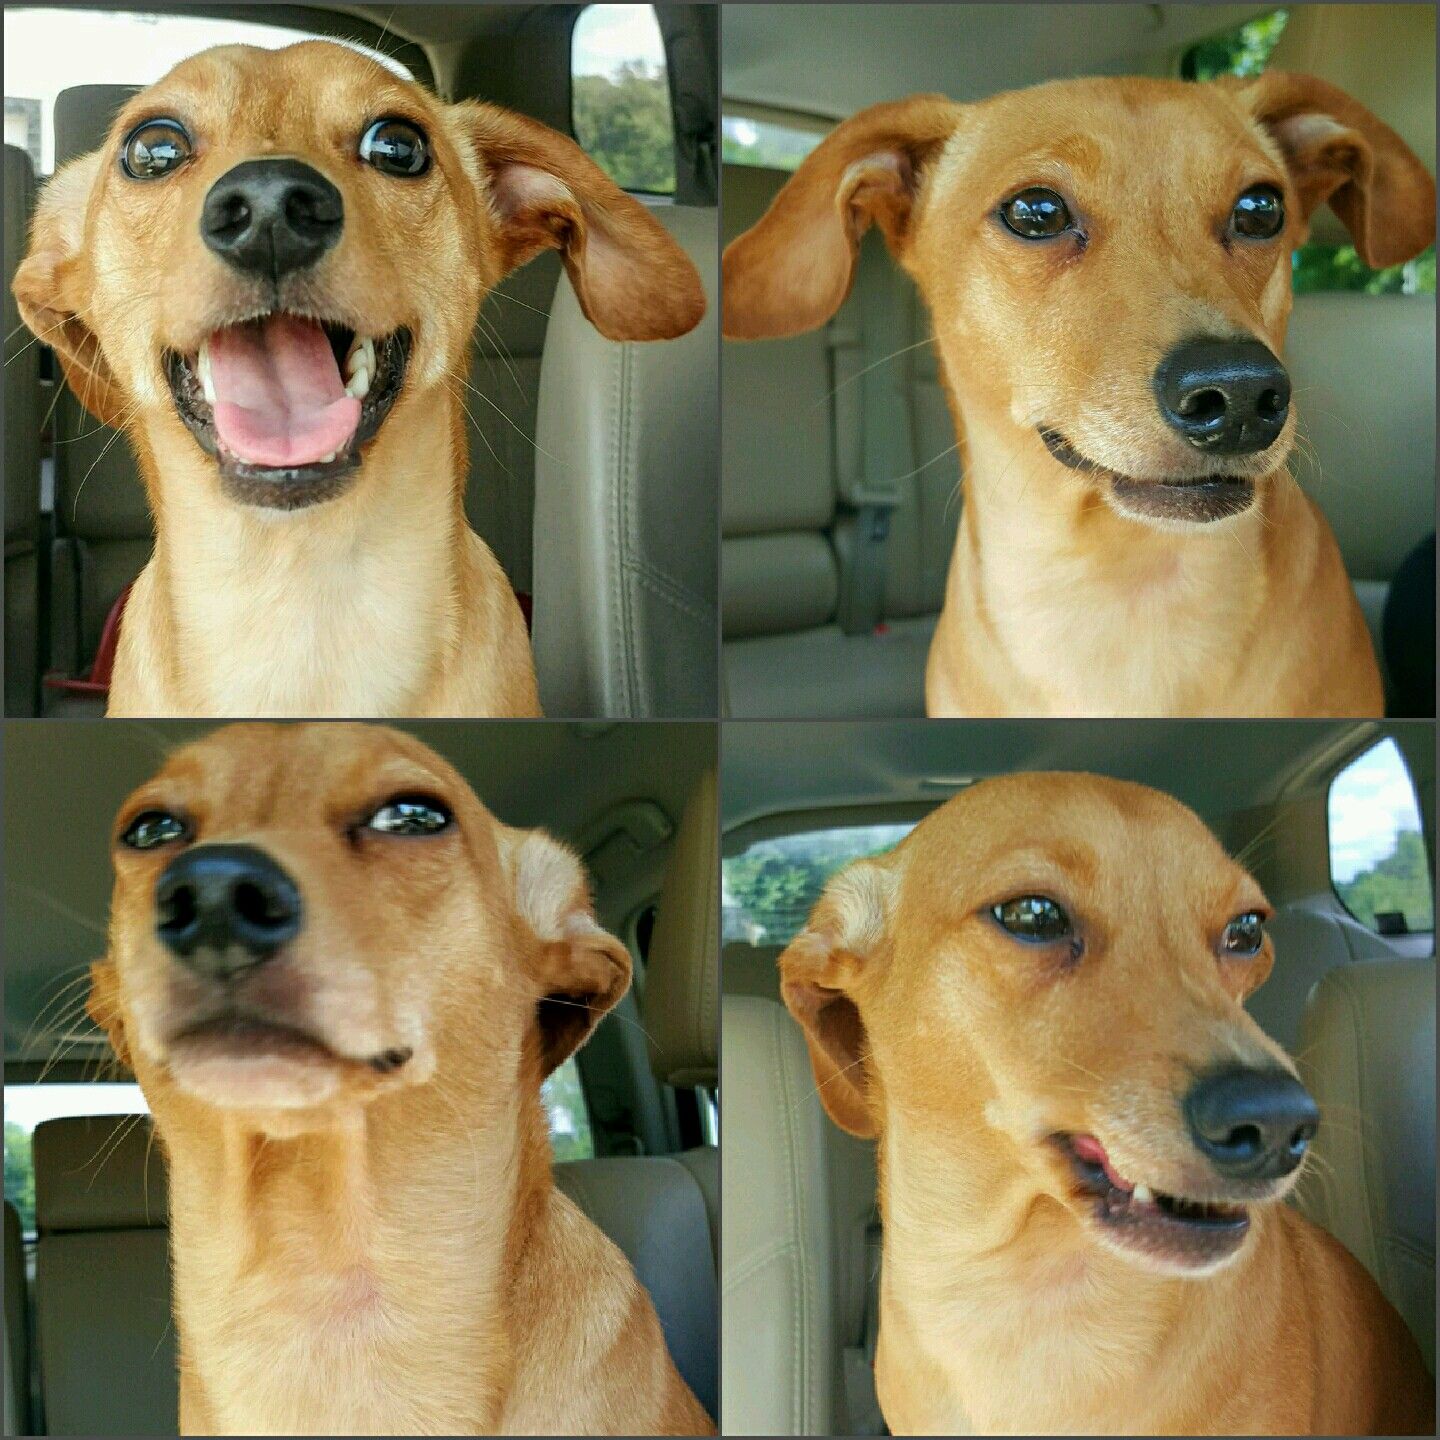 The four phases of him finding out I pet another dog.